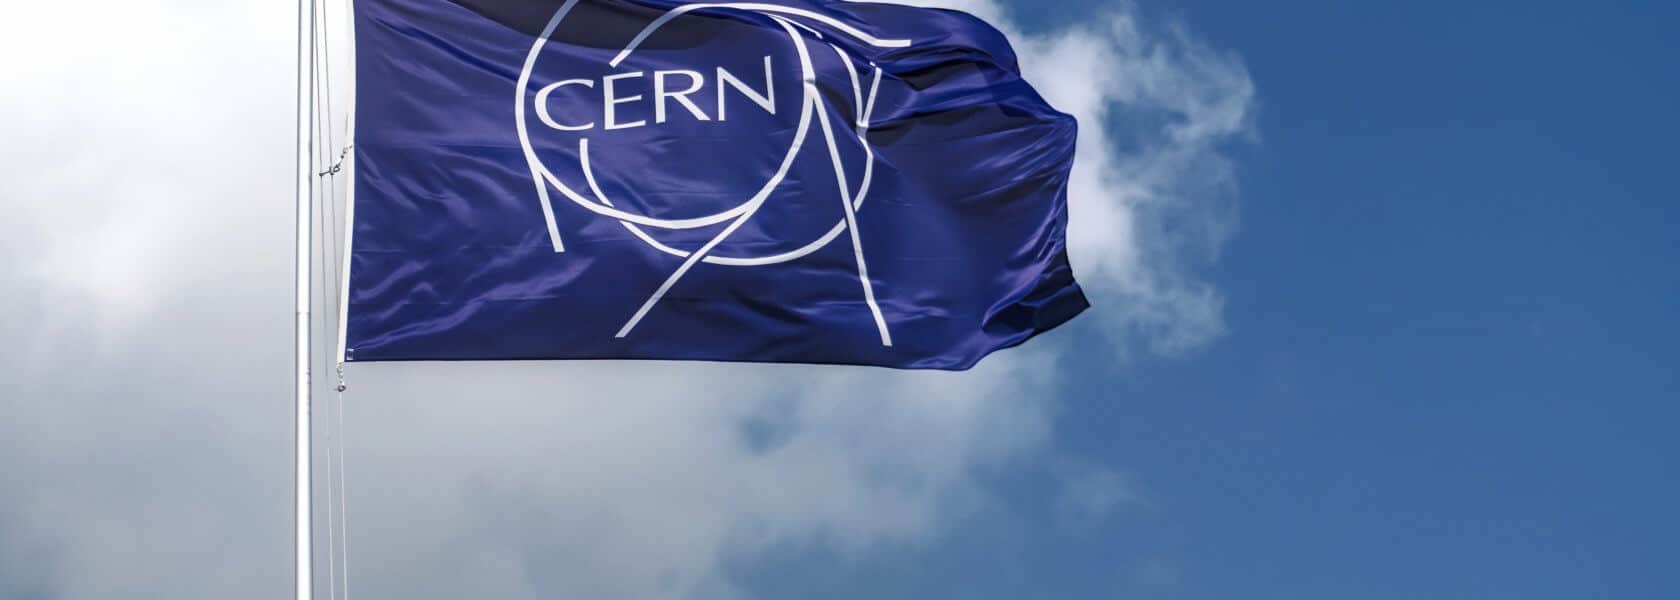 Various Internship Programmes For Students And Researchers At CERN